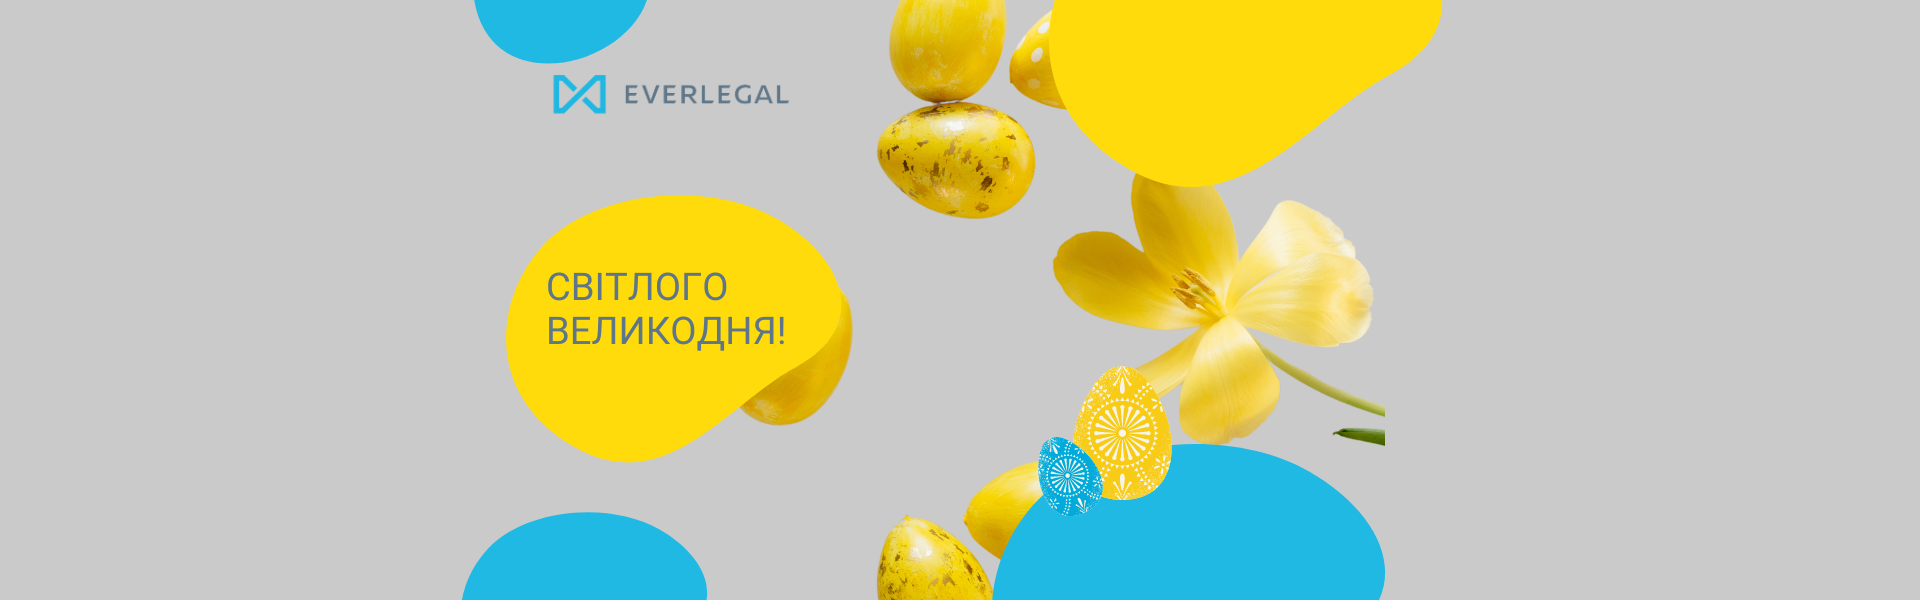 everlegal-wishes-you-a-happy-easter